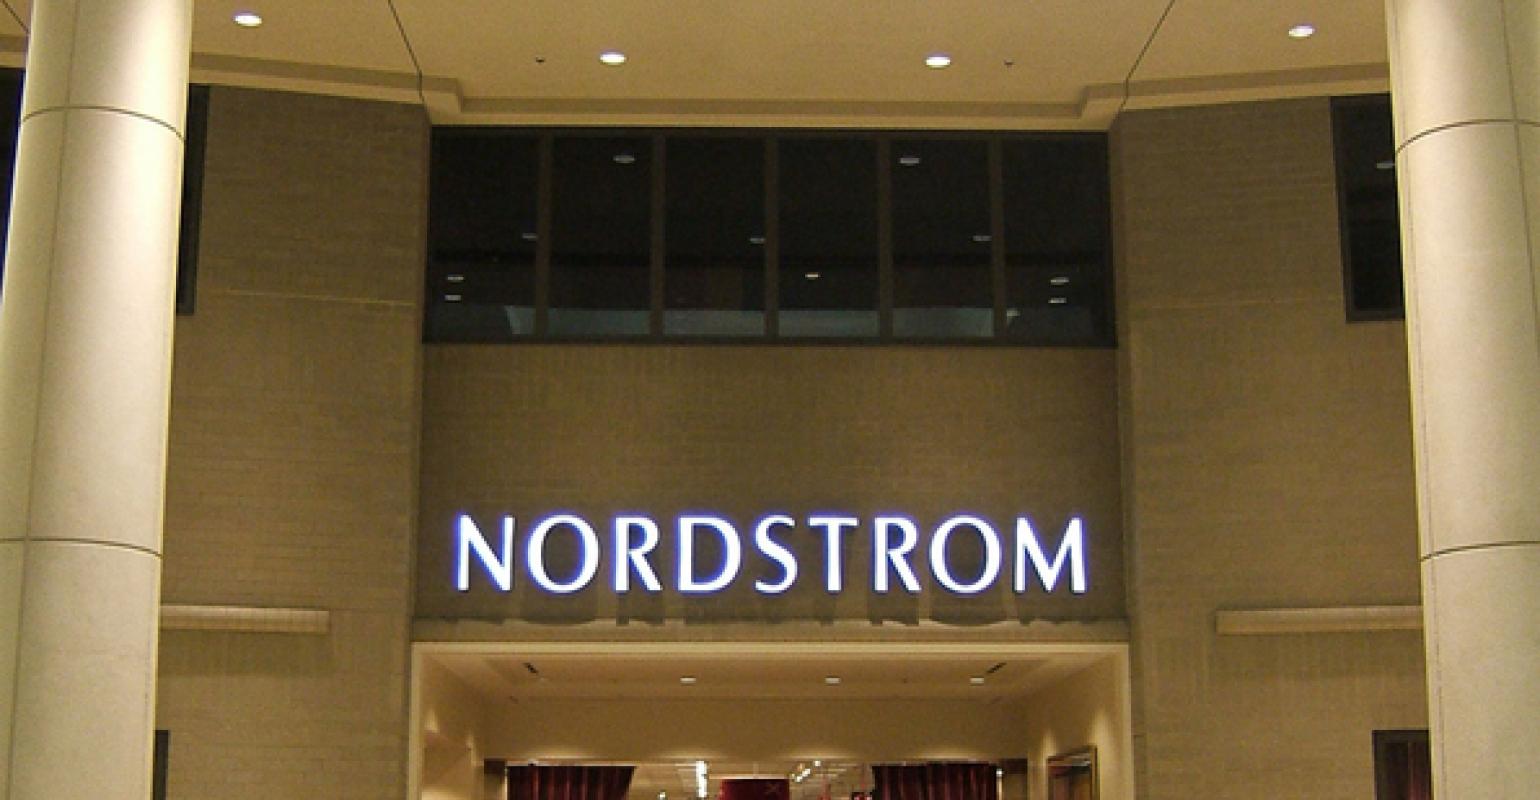 Nordstrom's discount Rack stores are key to retailer's future